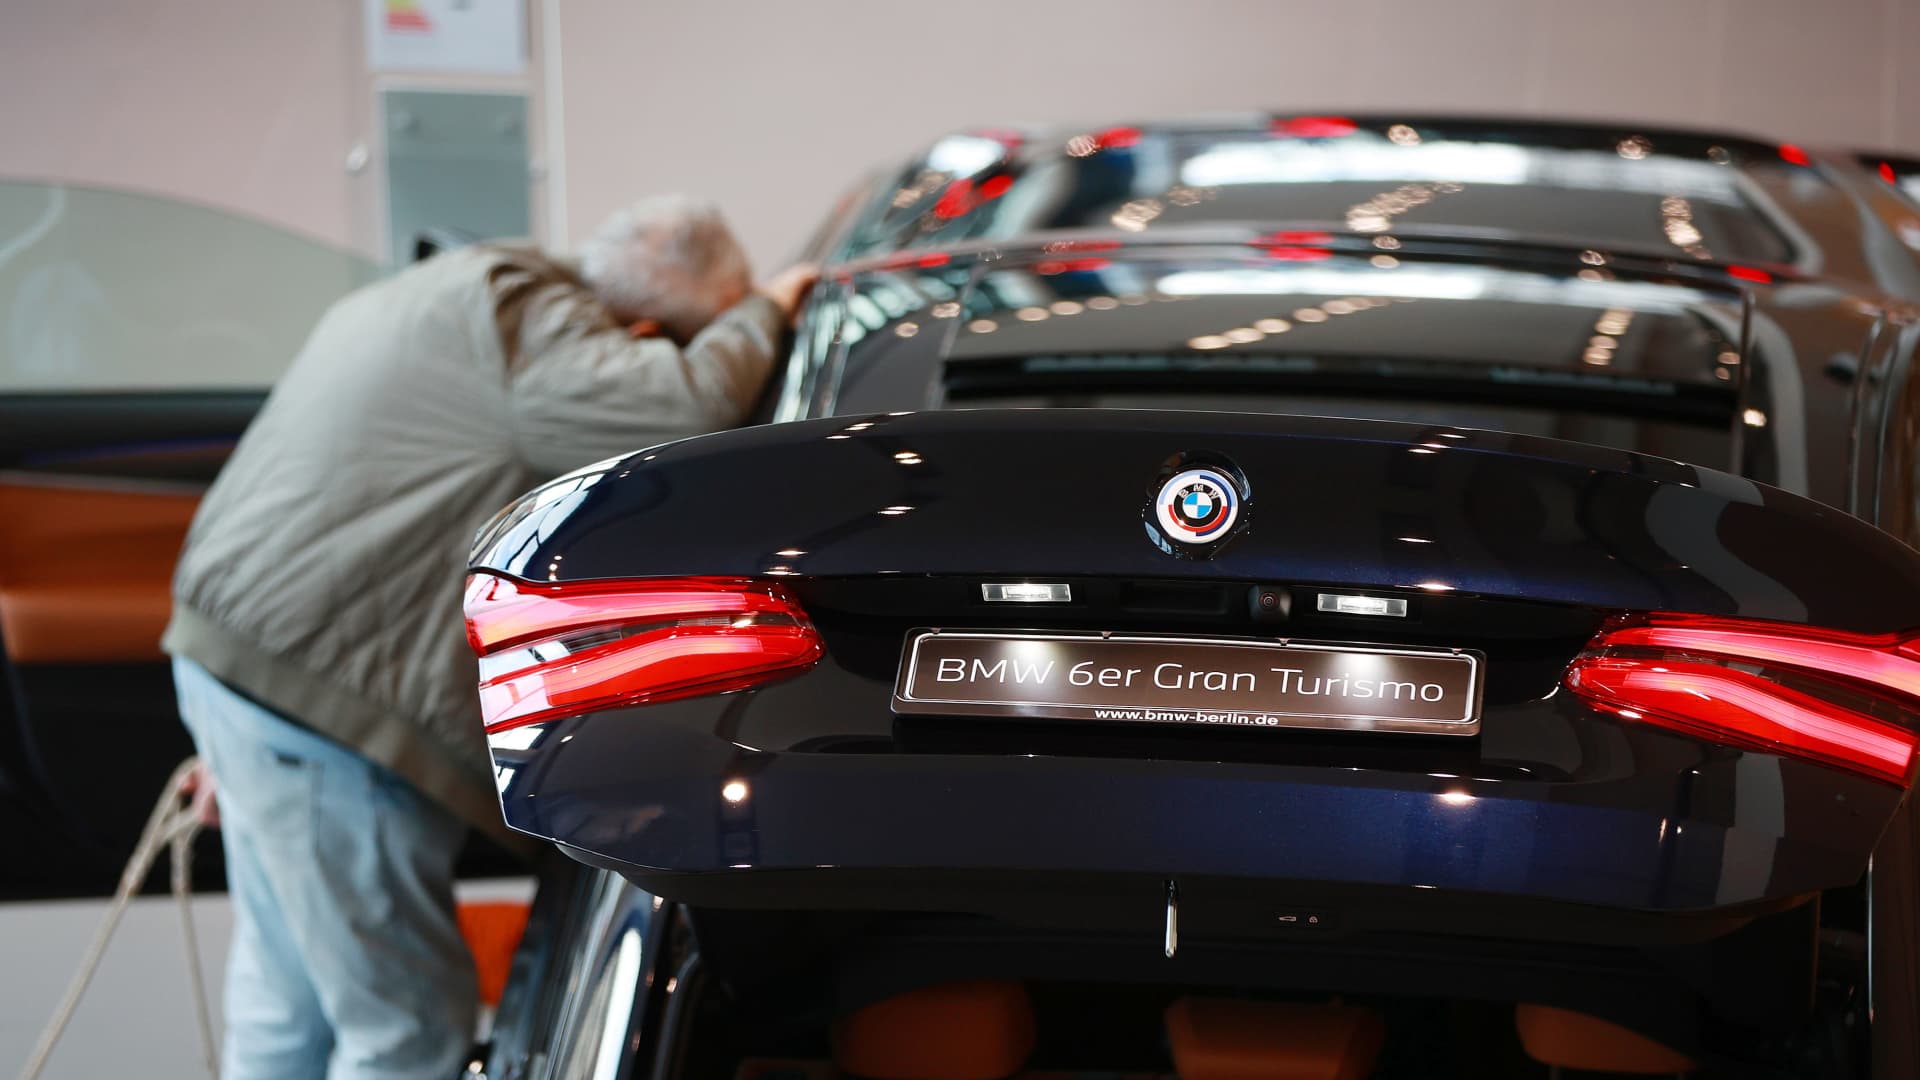 A customer inspects the interior of a BMW 6 Series Gran Turismo automobile at a BMW AG showroom in Berlin, Germany, on March 14, 2023.